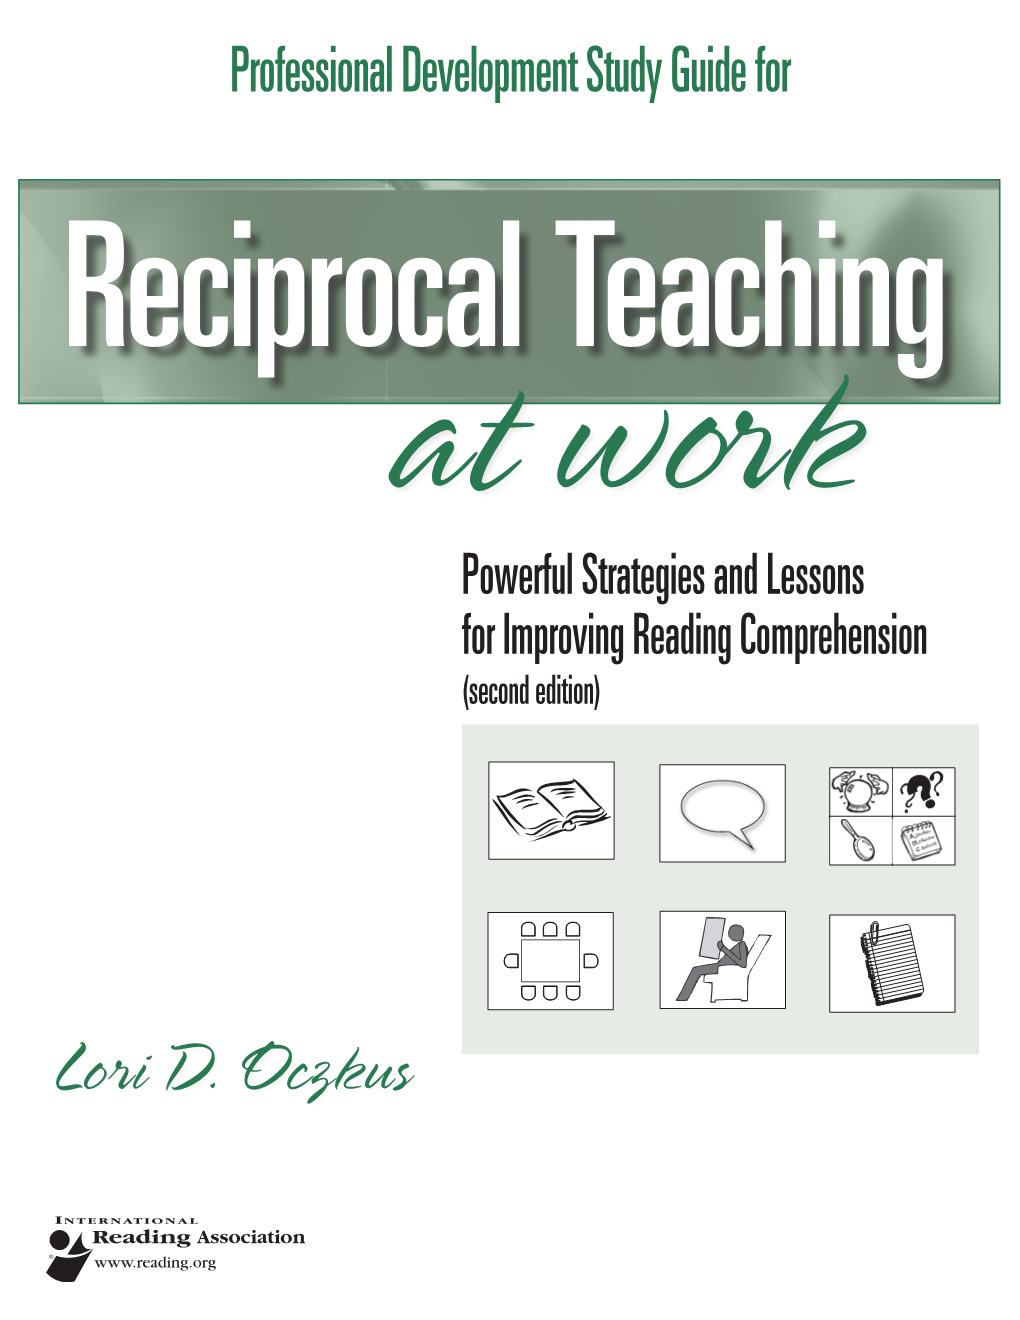 Professional Development Study Guide for Reciprocal Teaching at Work Powerful Strategies and Lessons for Improving Reading Comprehension (Second Edition)